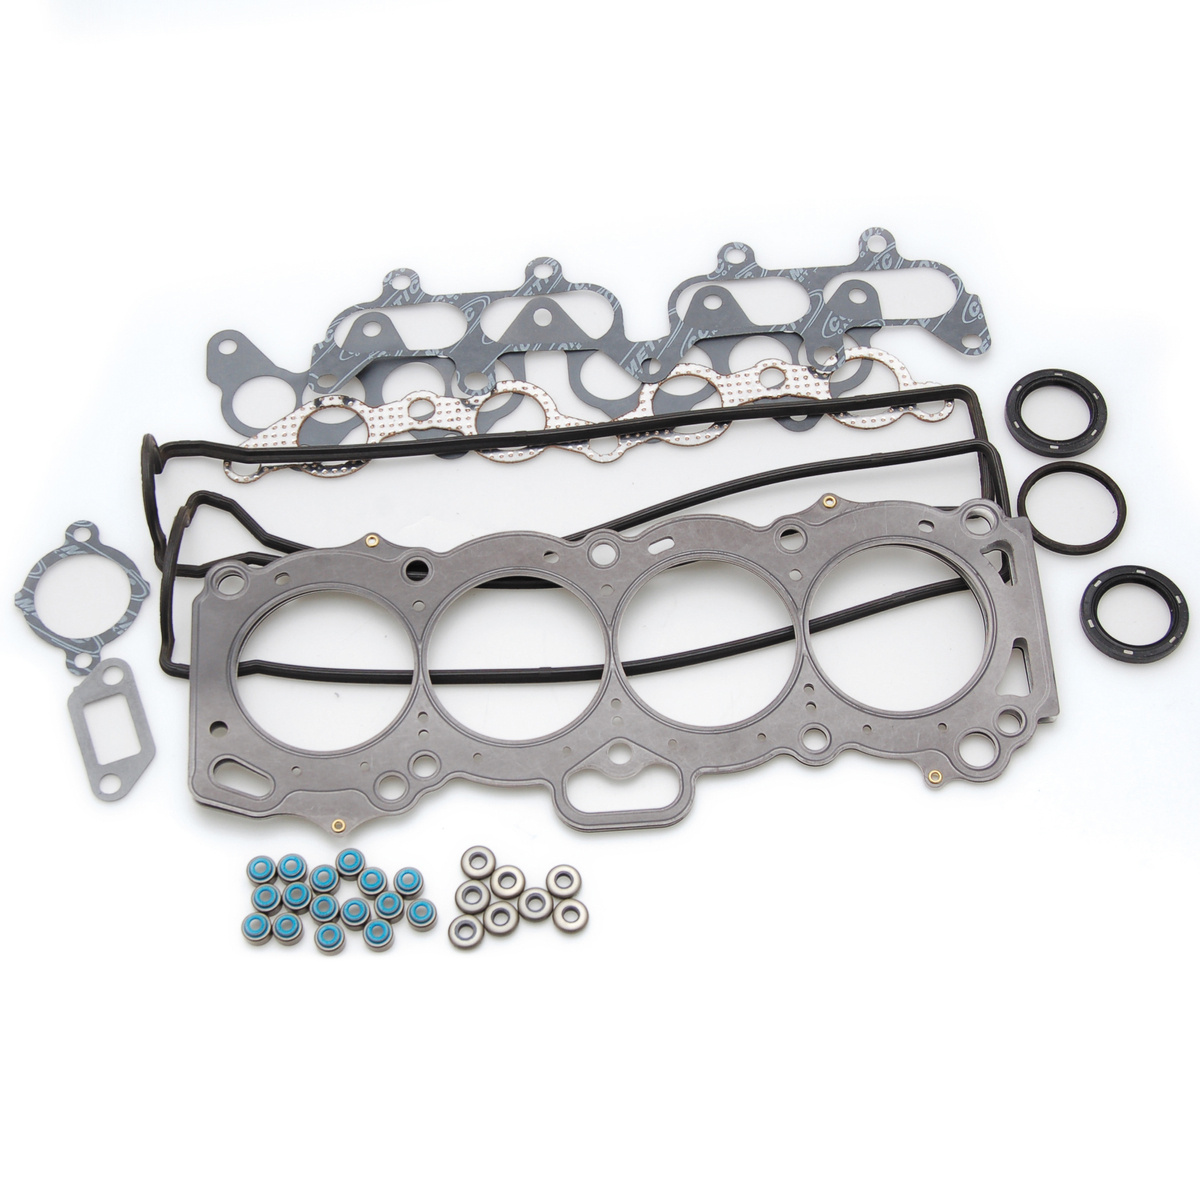 Cylinder Head Gasket Toyota 4A-GE Top End Gasket Kit, 81.5mm Bore, .040" MLS , 16-Valve Cometic PRO2041T-815-040